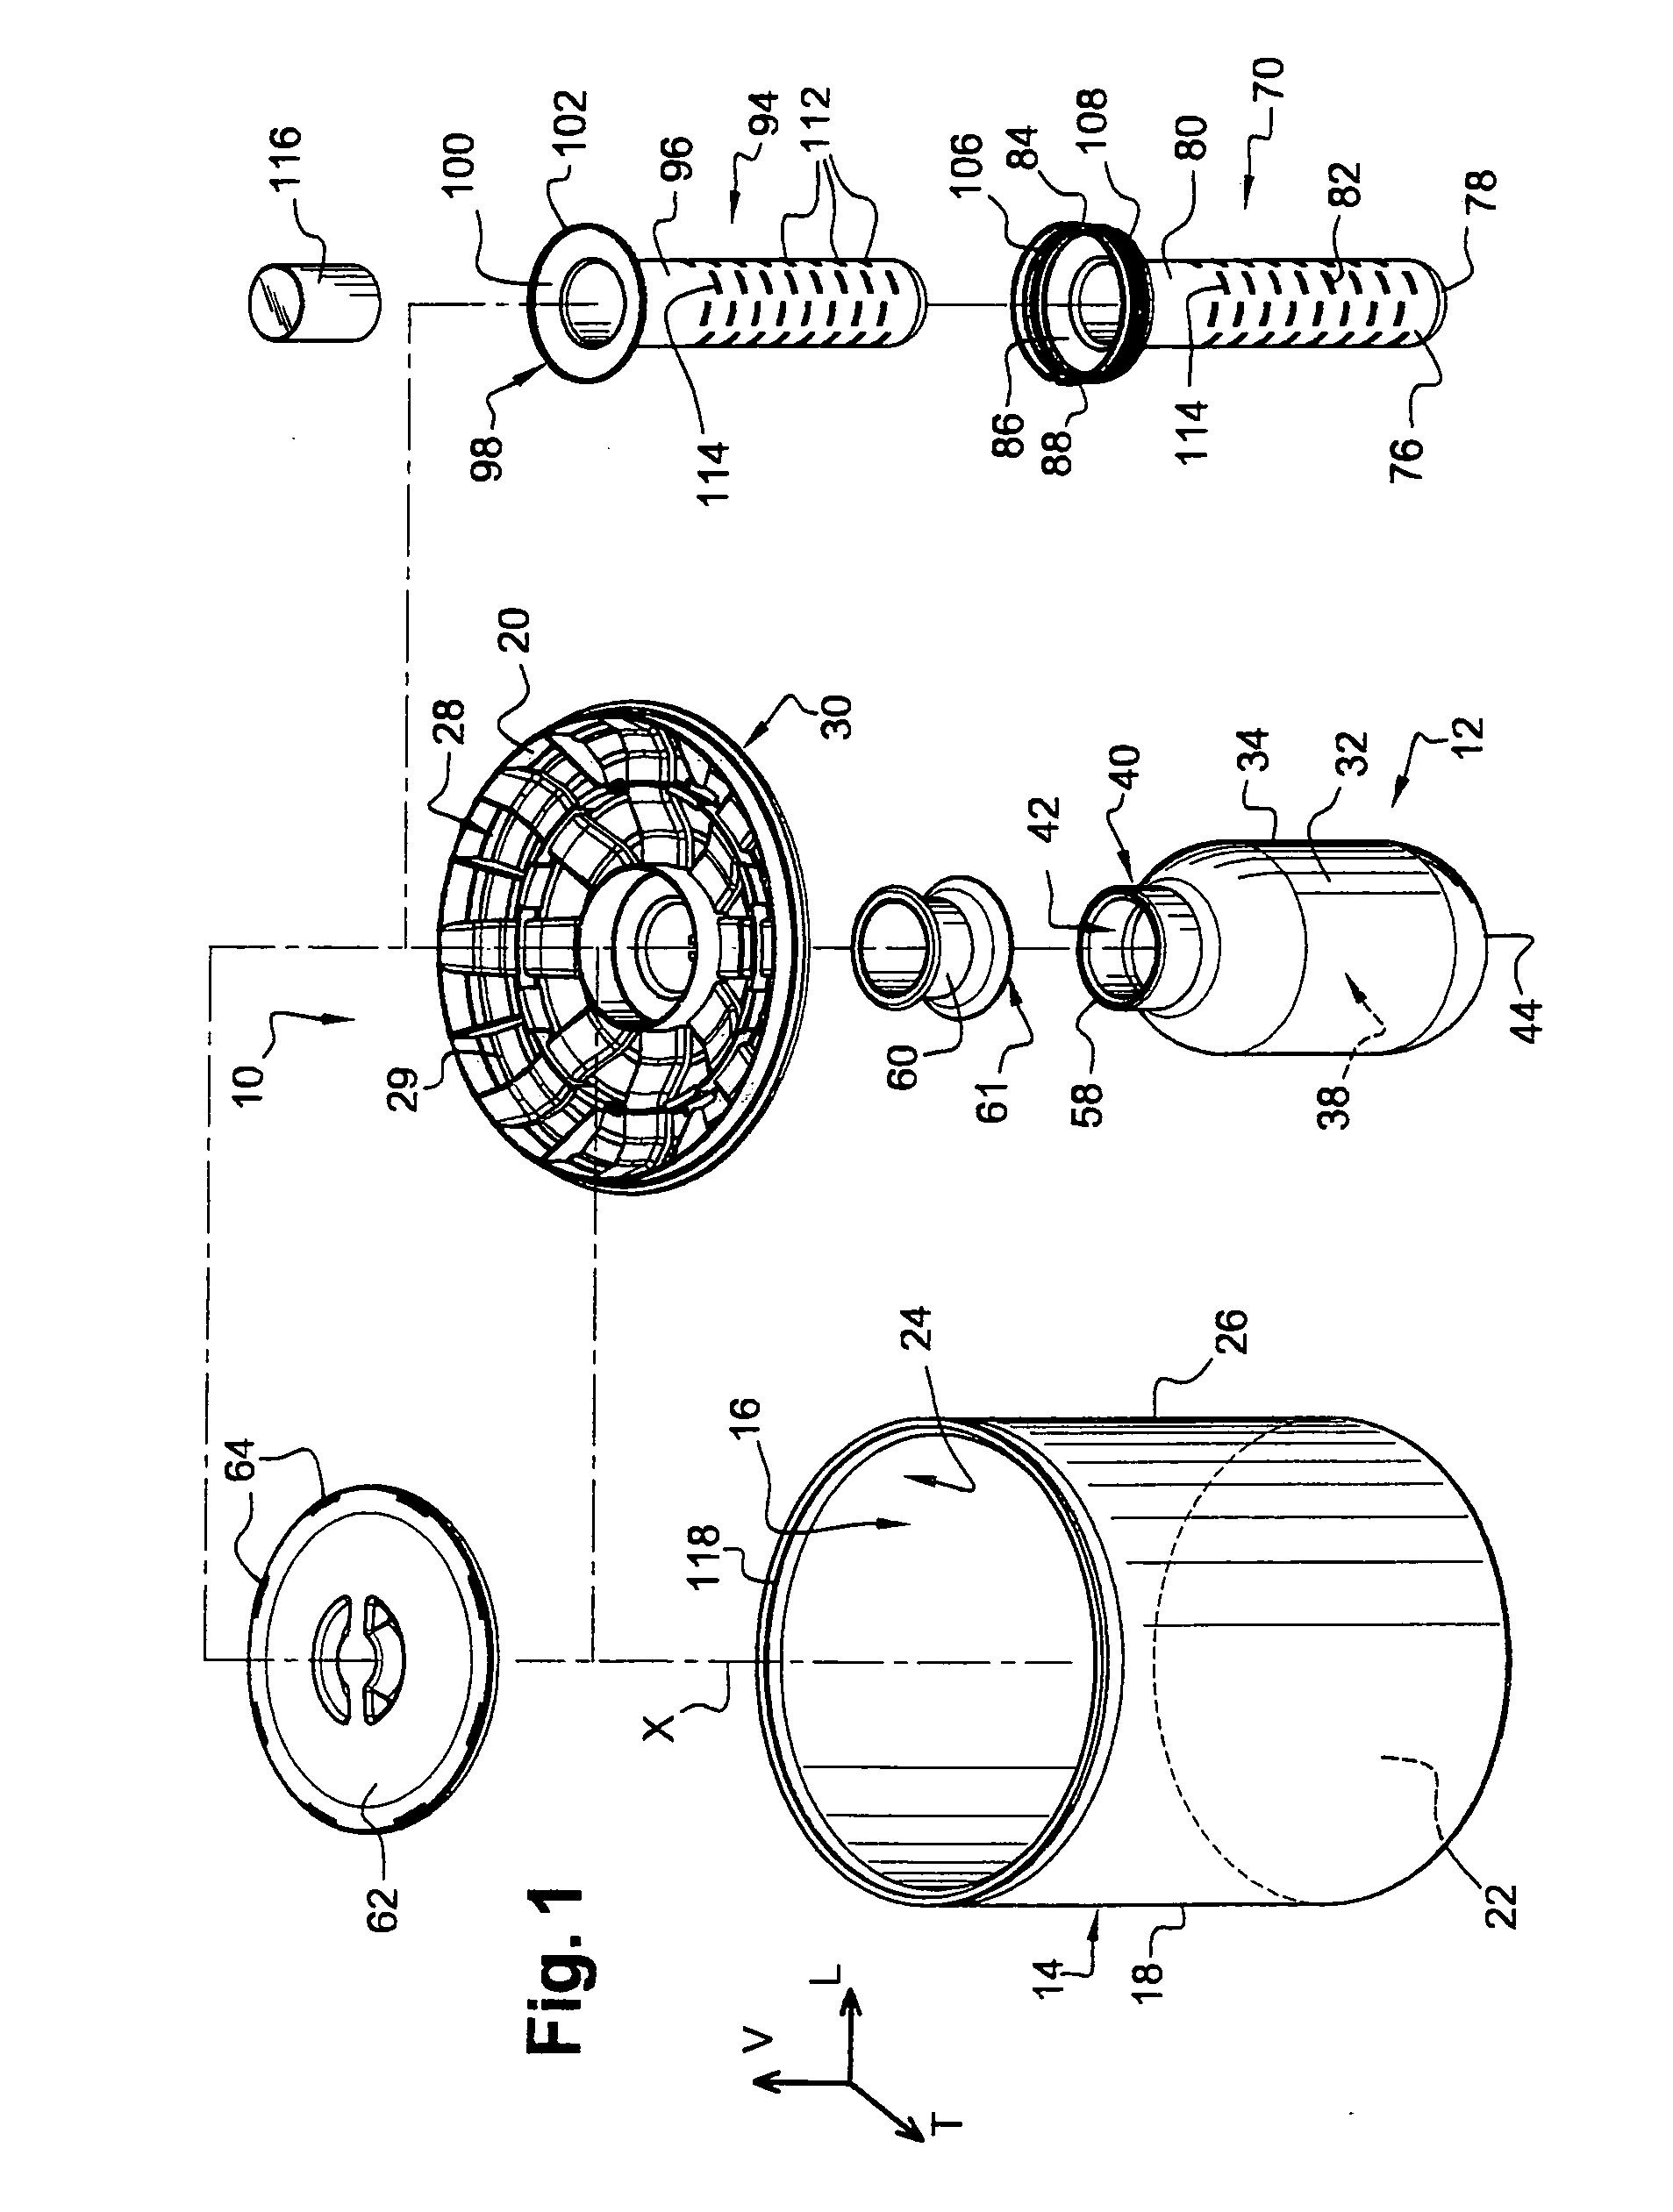 Transportation and/or storage device comprising a double-walled insulating bulb